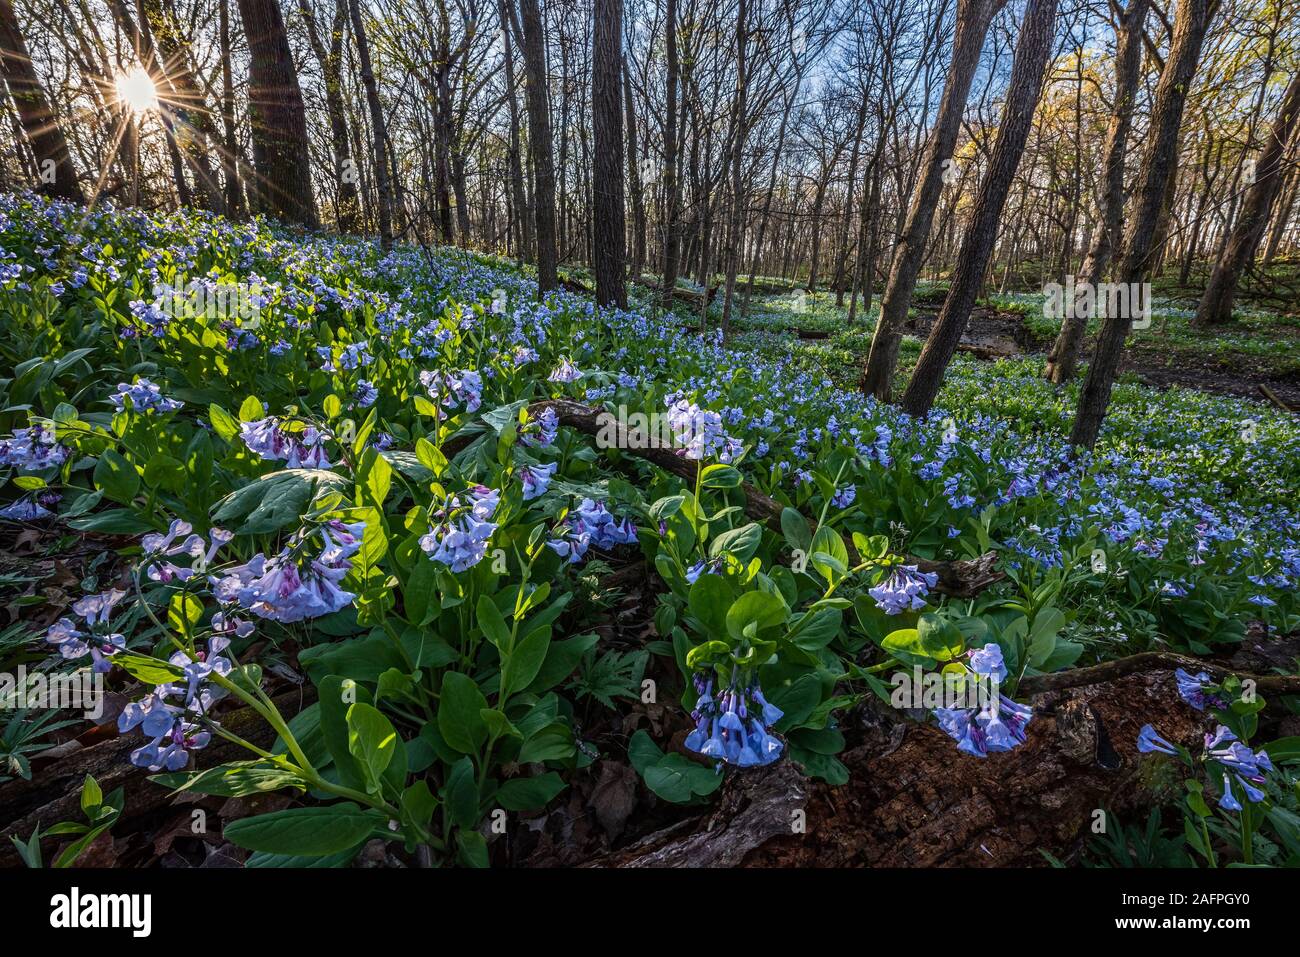 An April sun rises to warm a spring woodland blooming with Virginia bluebells (Mertensia virginica), a spring ephemeral flower found under the trees Stock Photo